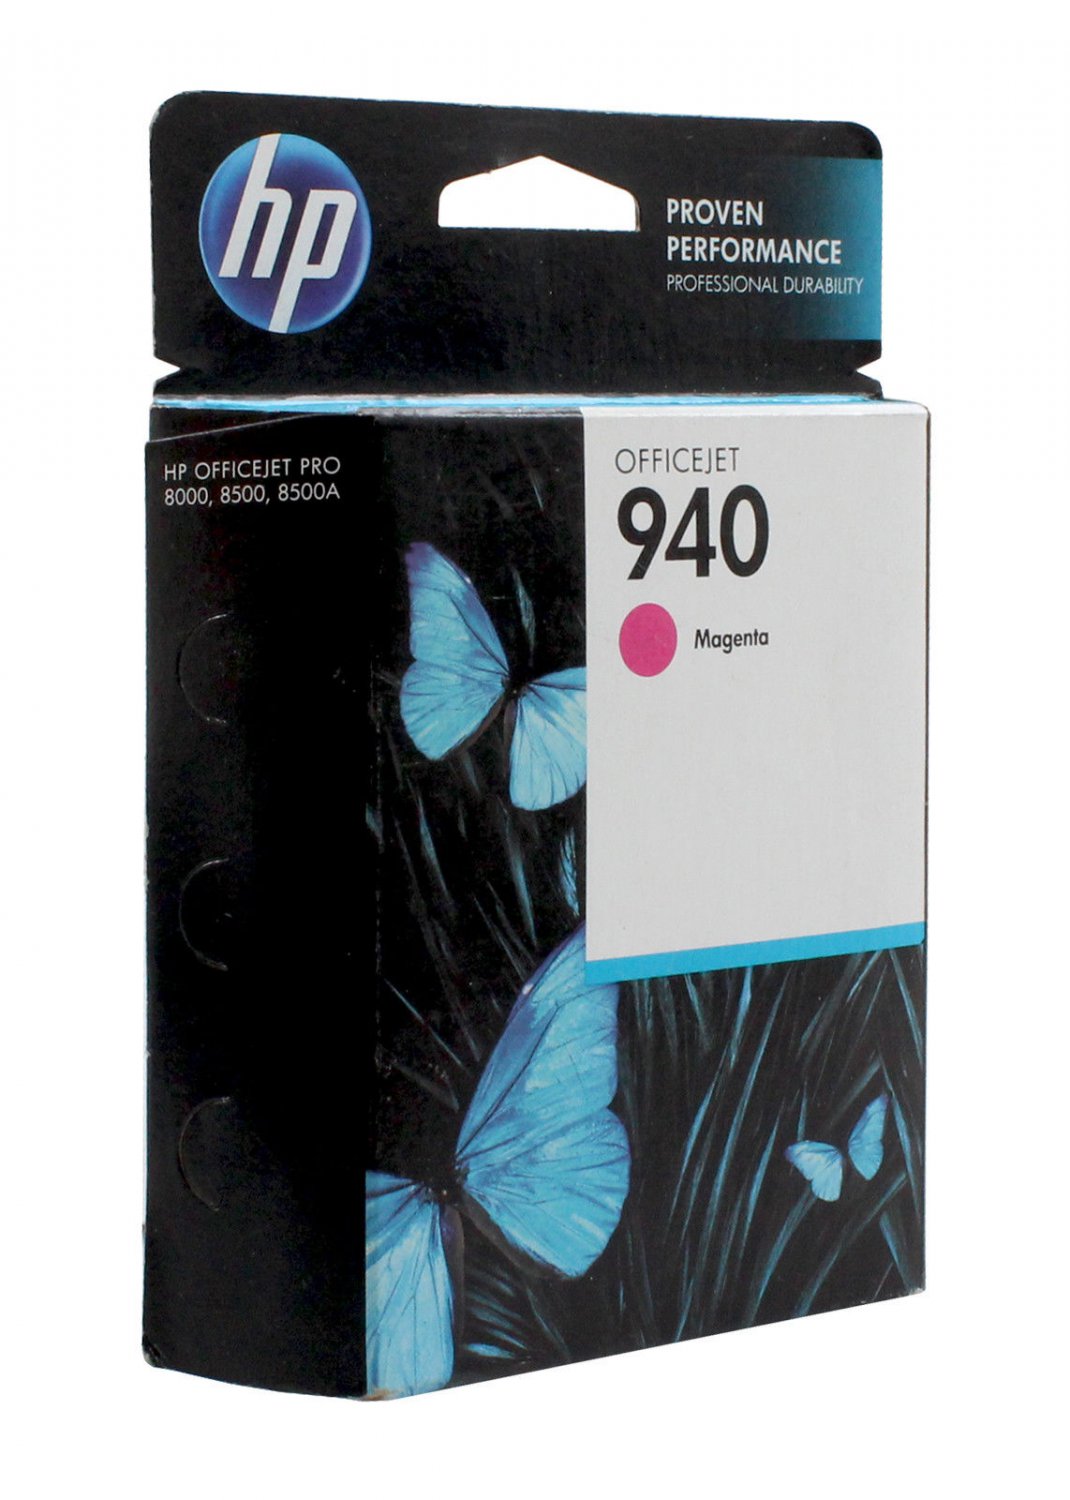 New HP Officejet 940 Magenta Ink Cartridge C4904A - Sealed